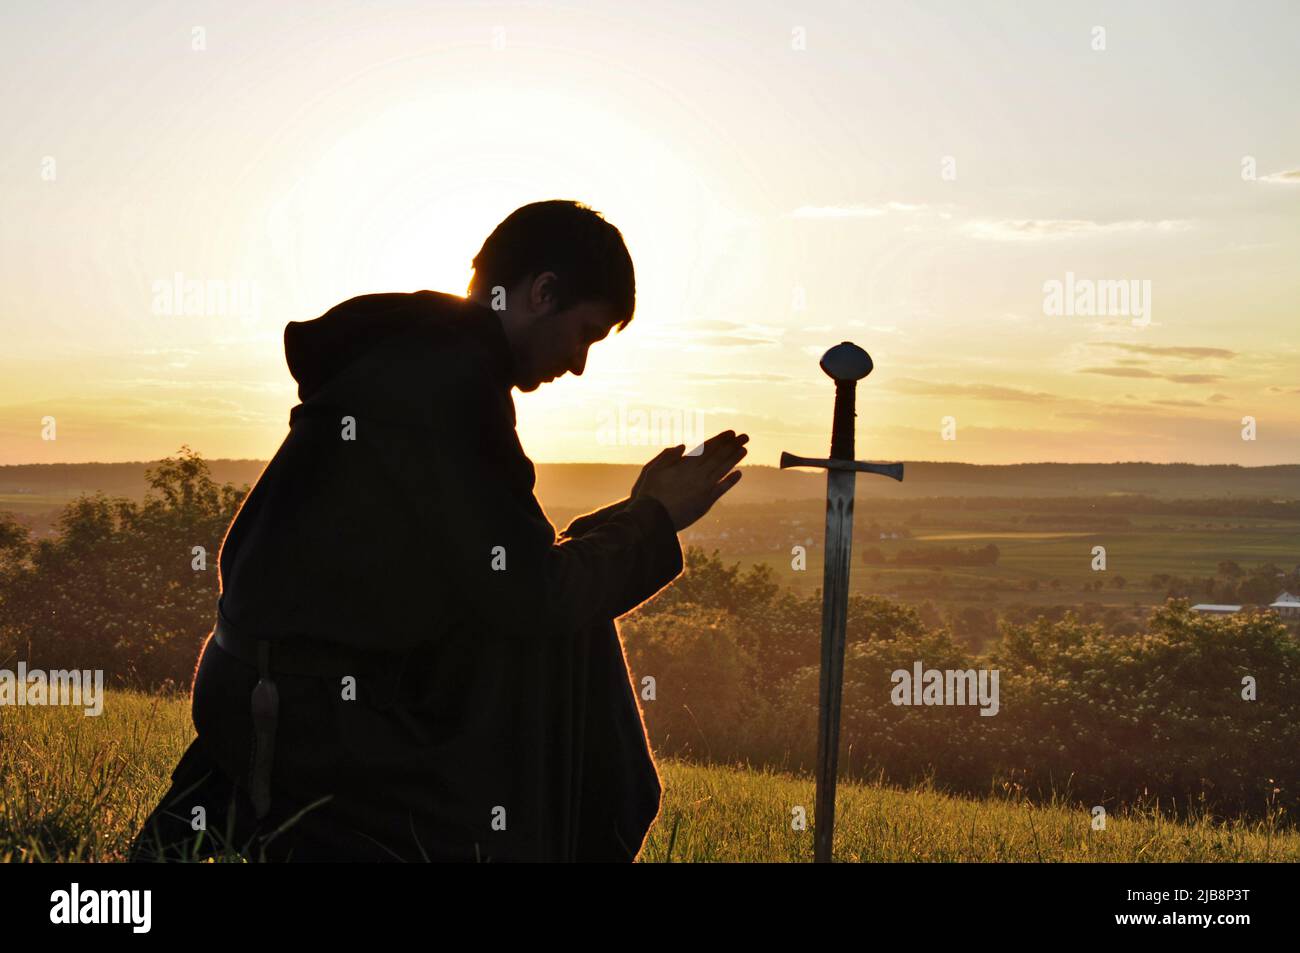 Knight praying silhouette and symbol of chivalry of a european knight, praying and kneeling in front of a sword in the sunset, with a burning sky. Stock Photo